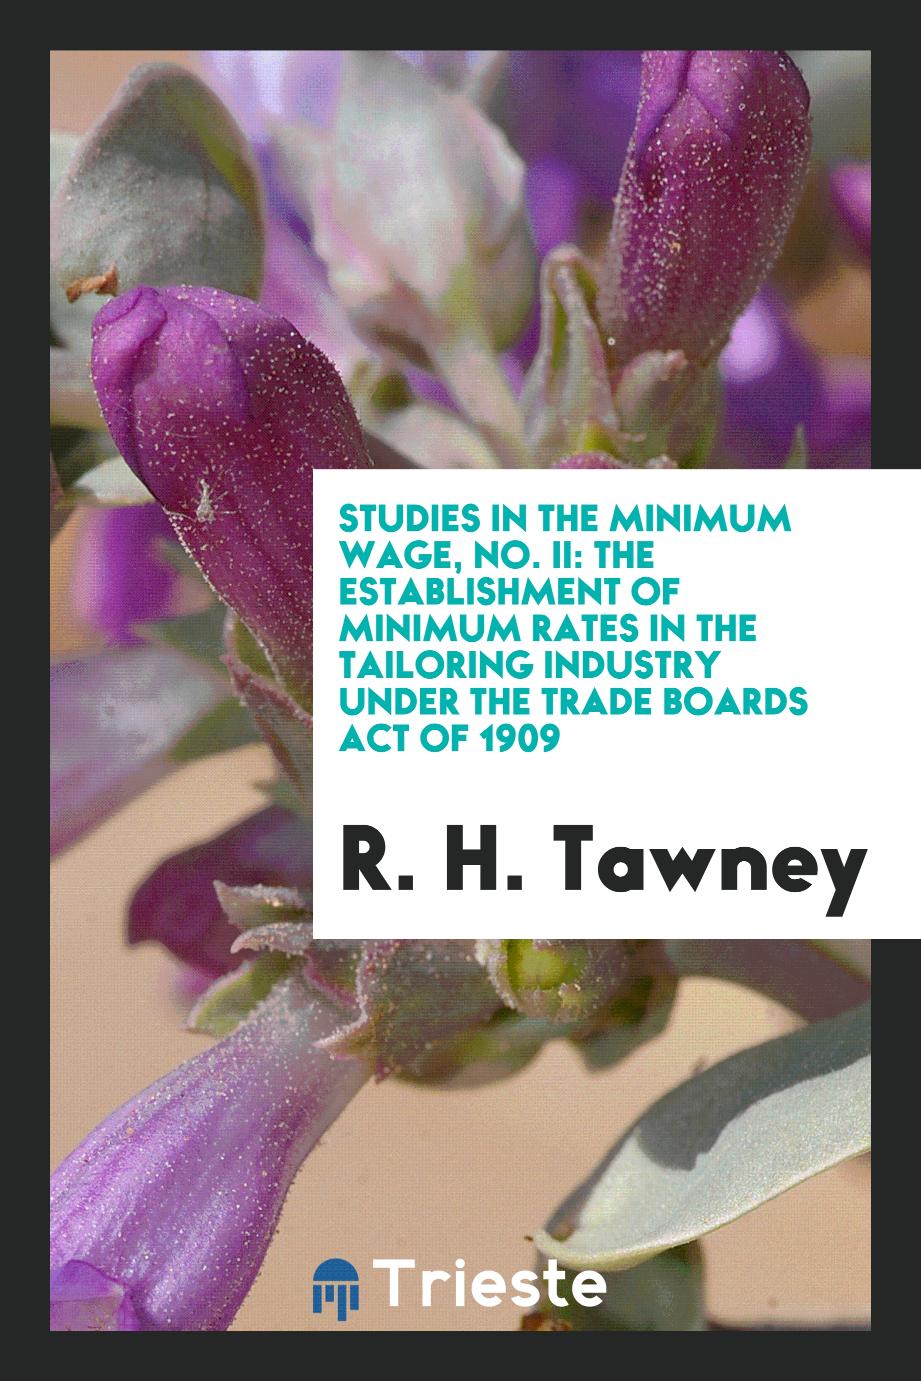 Studies in the minimum wage, No. II: The establishment of minimum rates in the tailoring industry under the Trade Boards Act of 1909